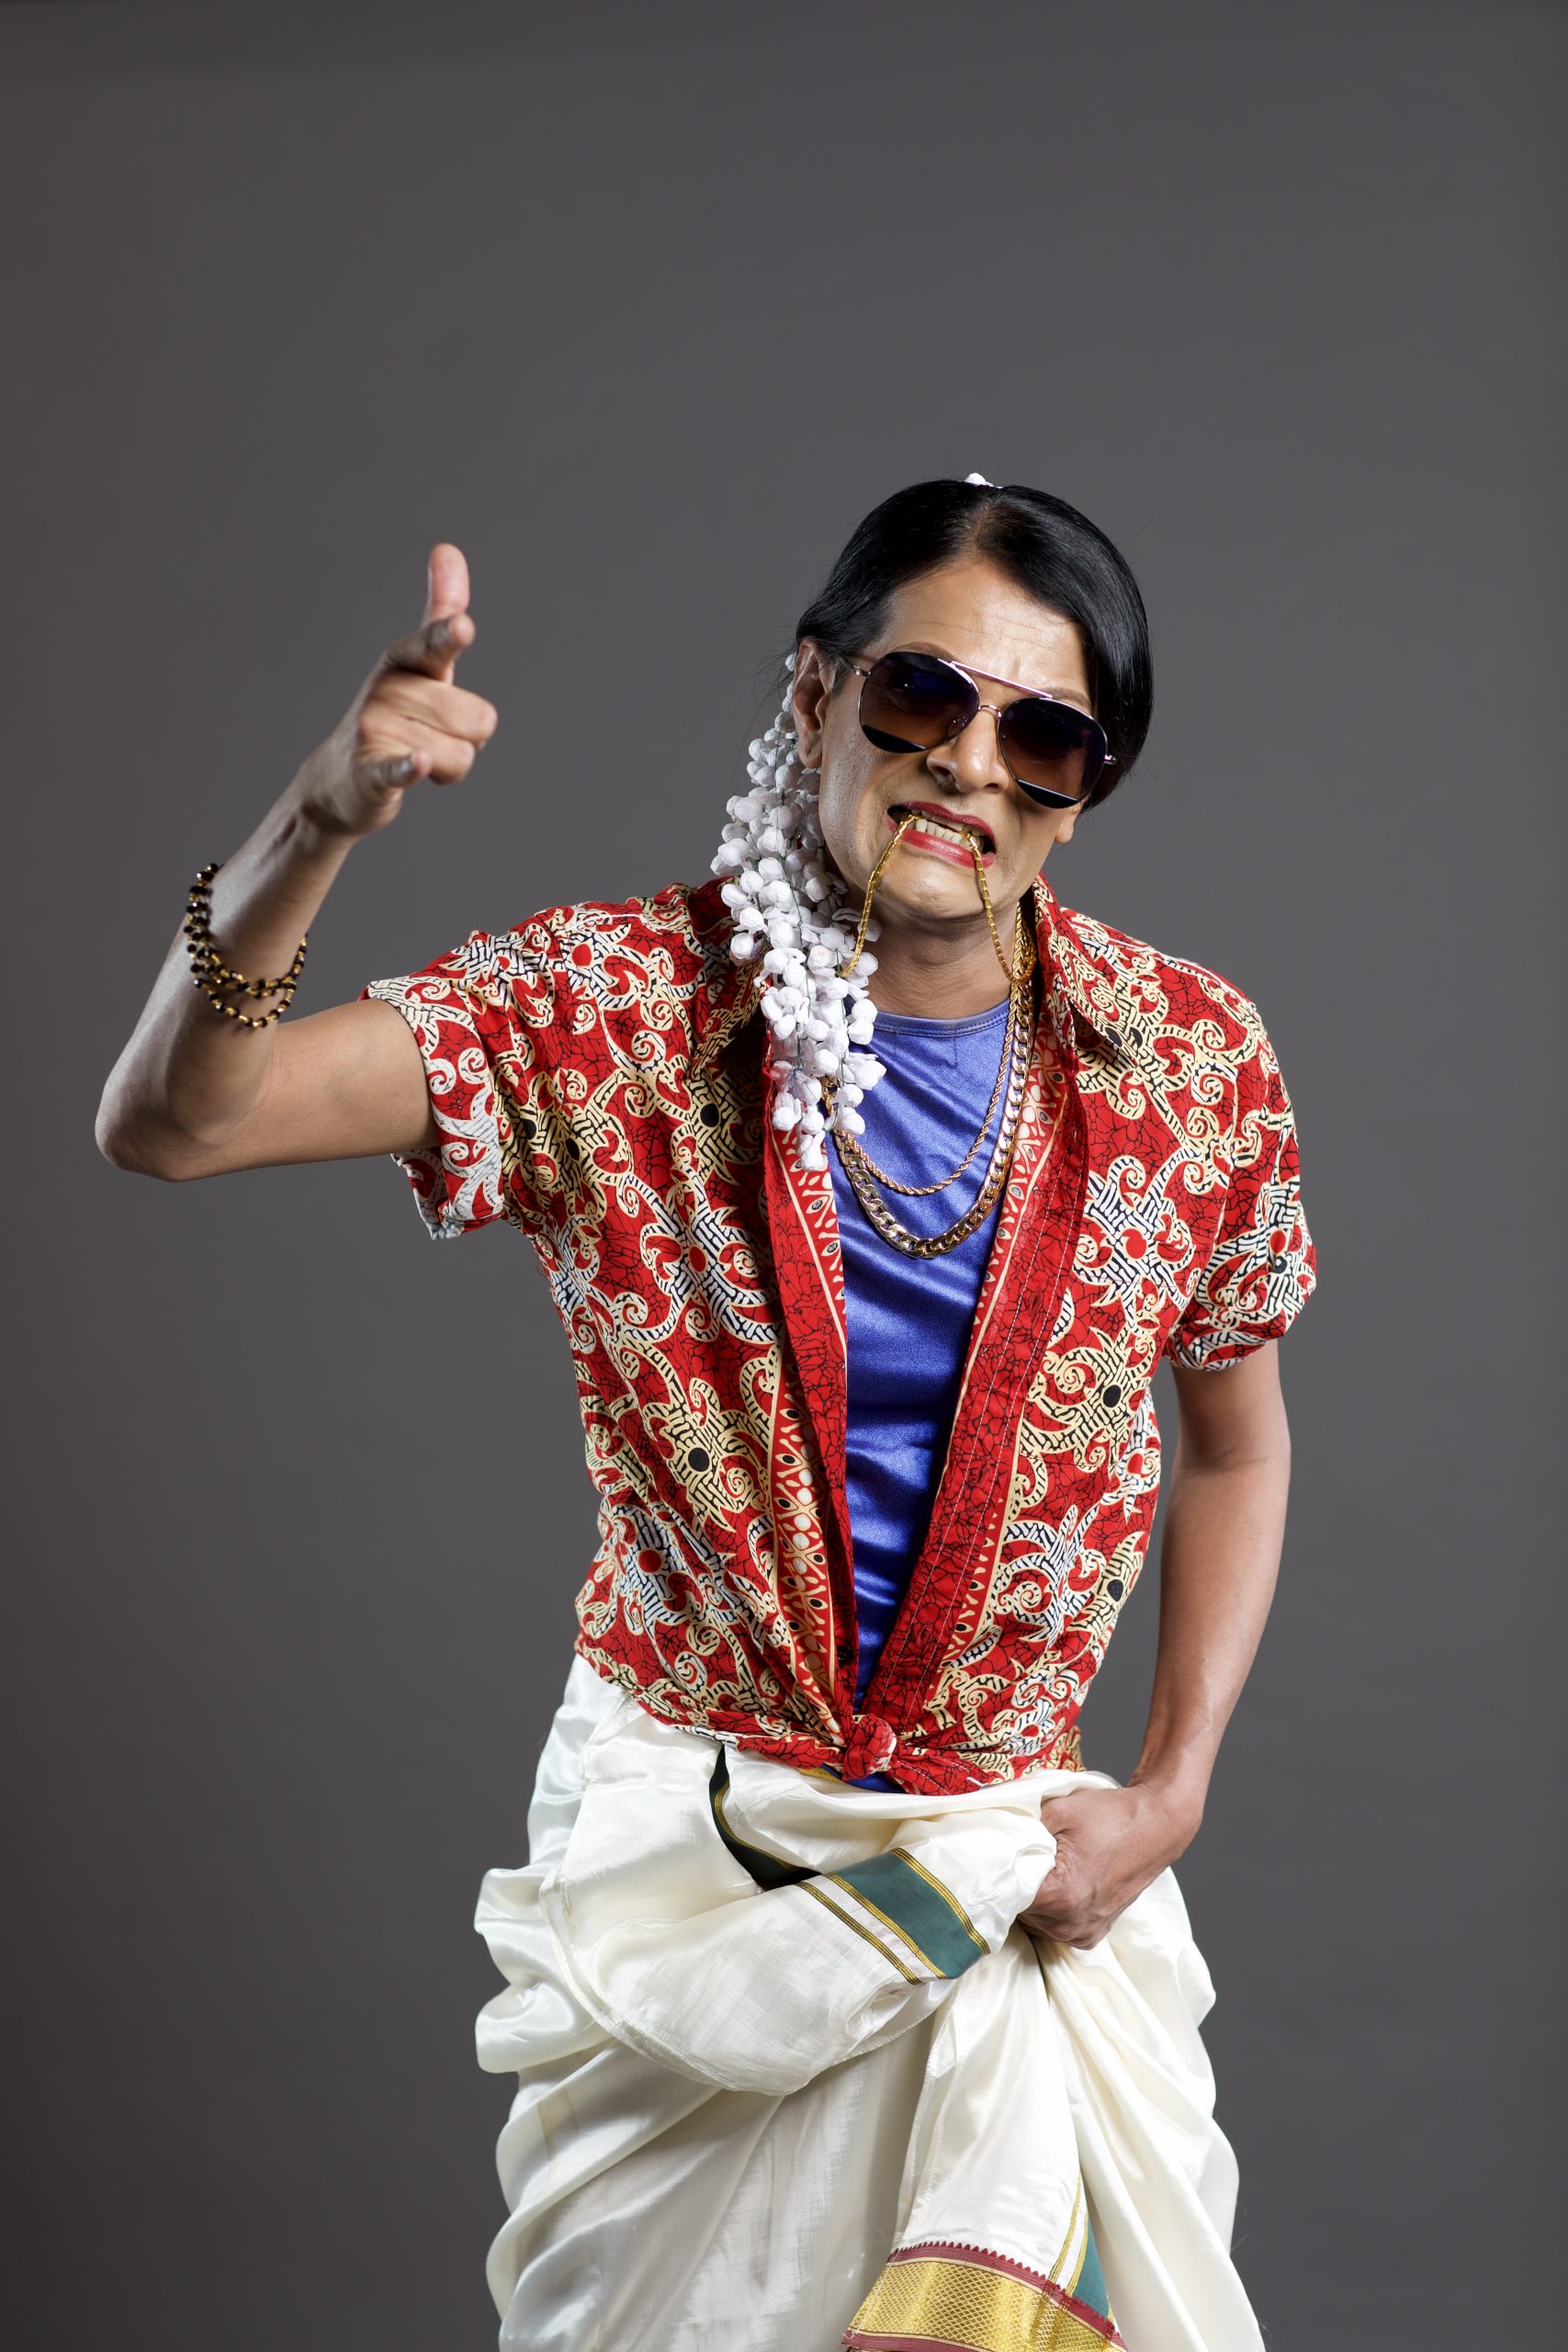 Singaporean comedian Kumar is set to perform in Malaysia this October. Image credit: Provided to WauPost